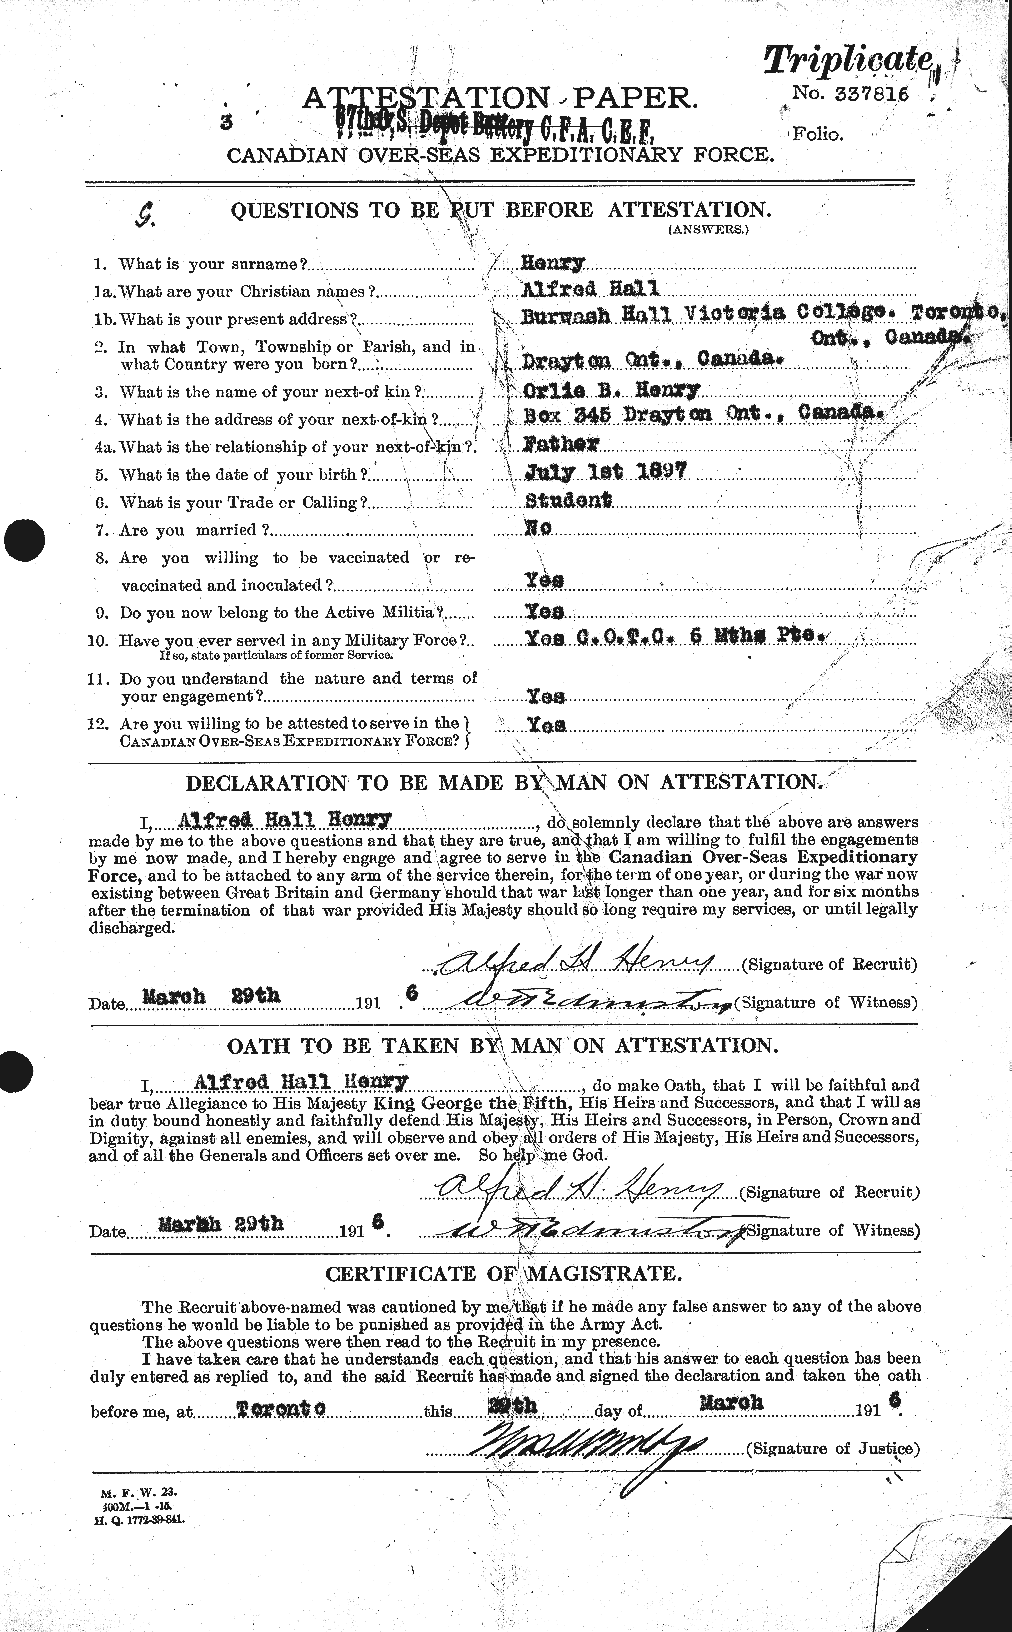 Personnel Records of the First World War - CEF 392770a